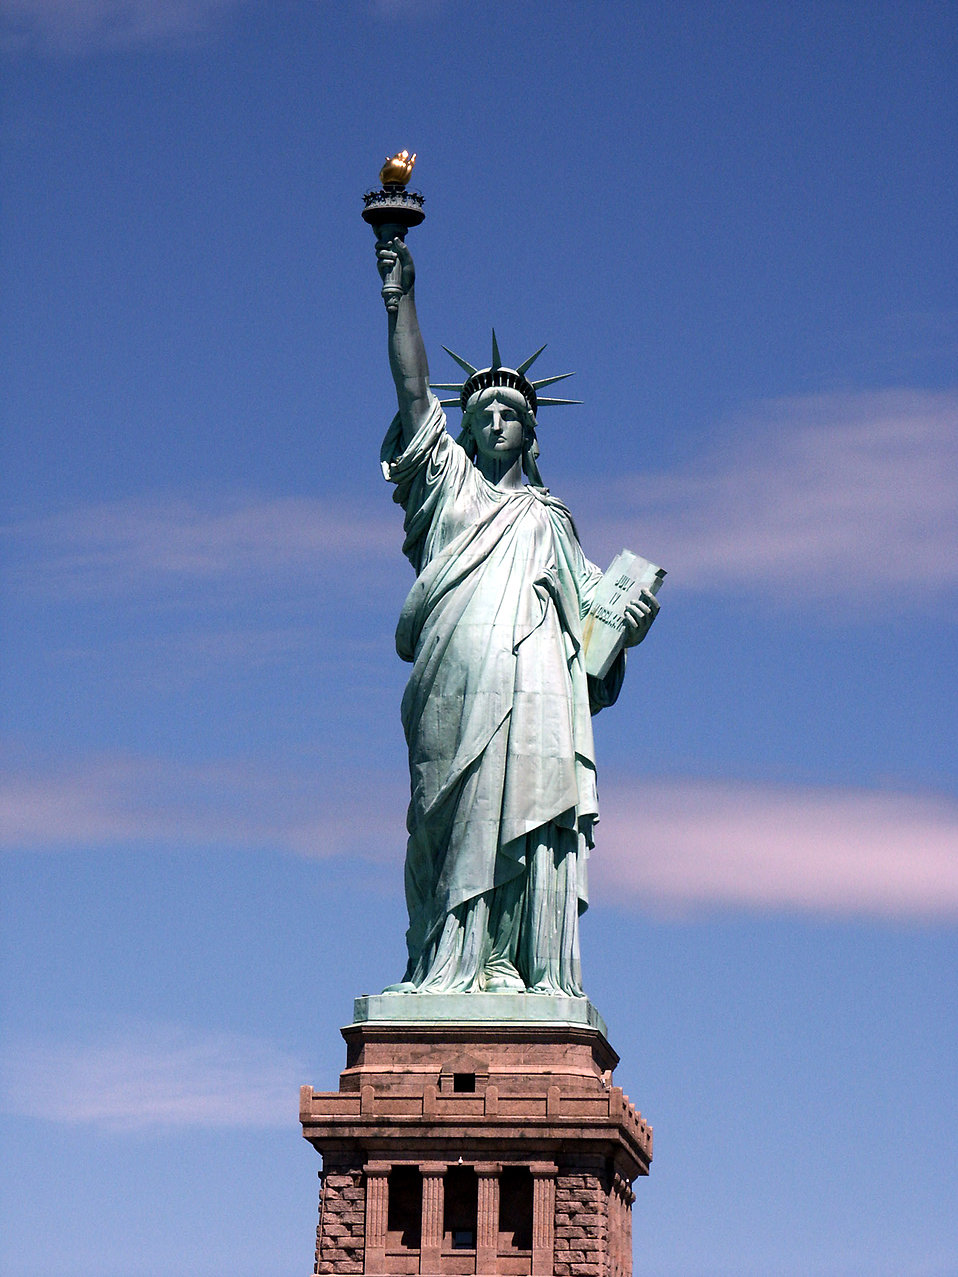 Free stock photo The Statue of Liberty monument